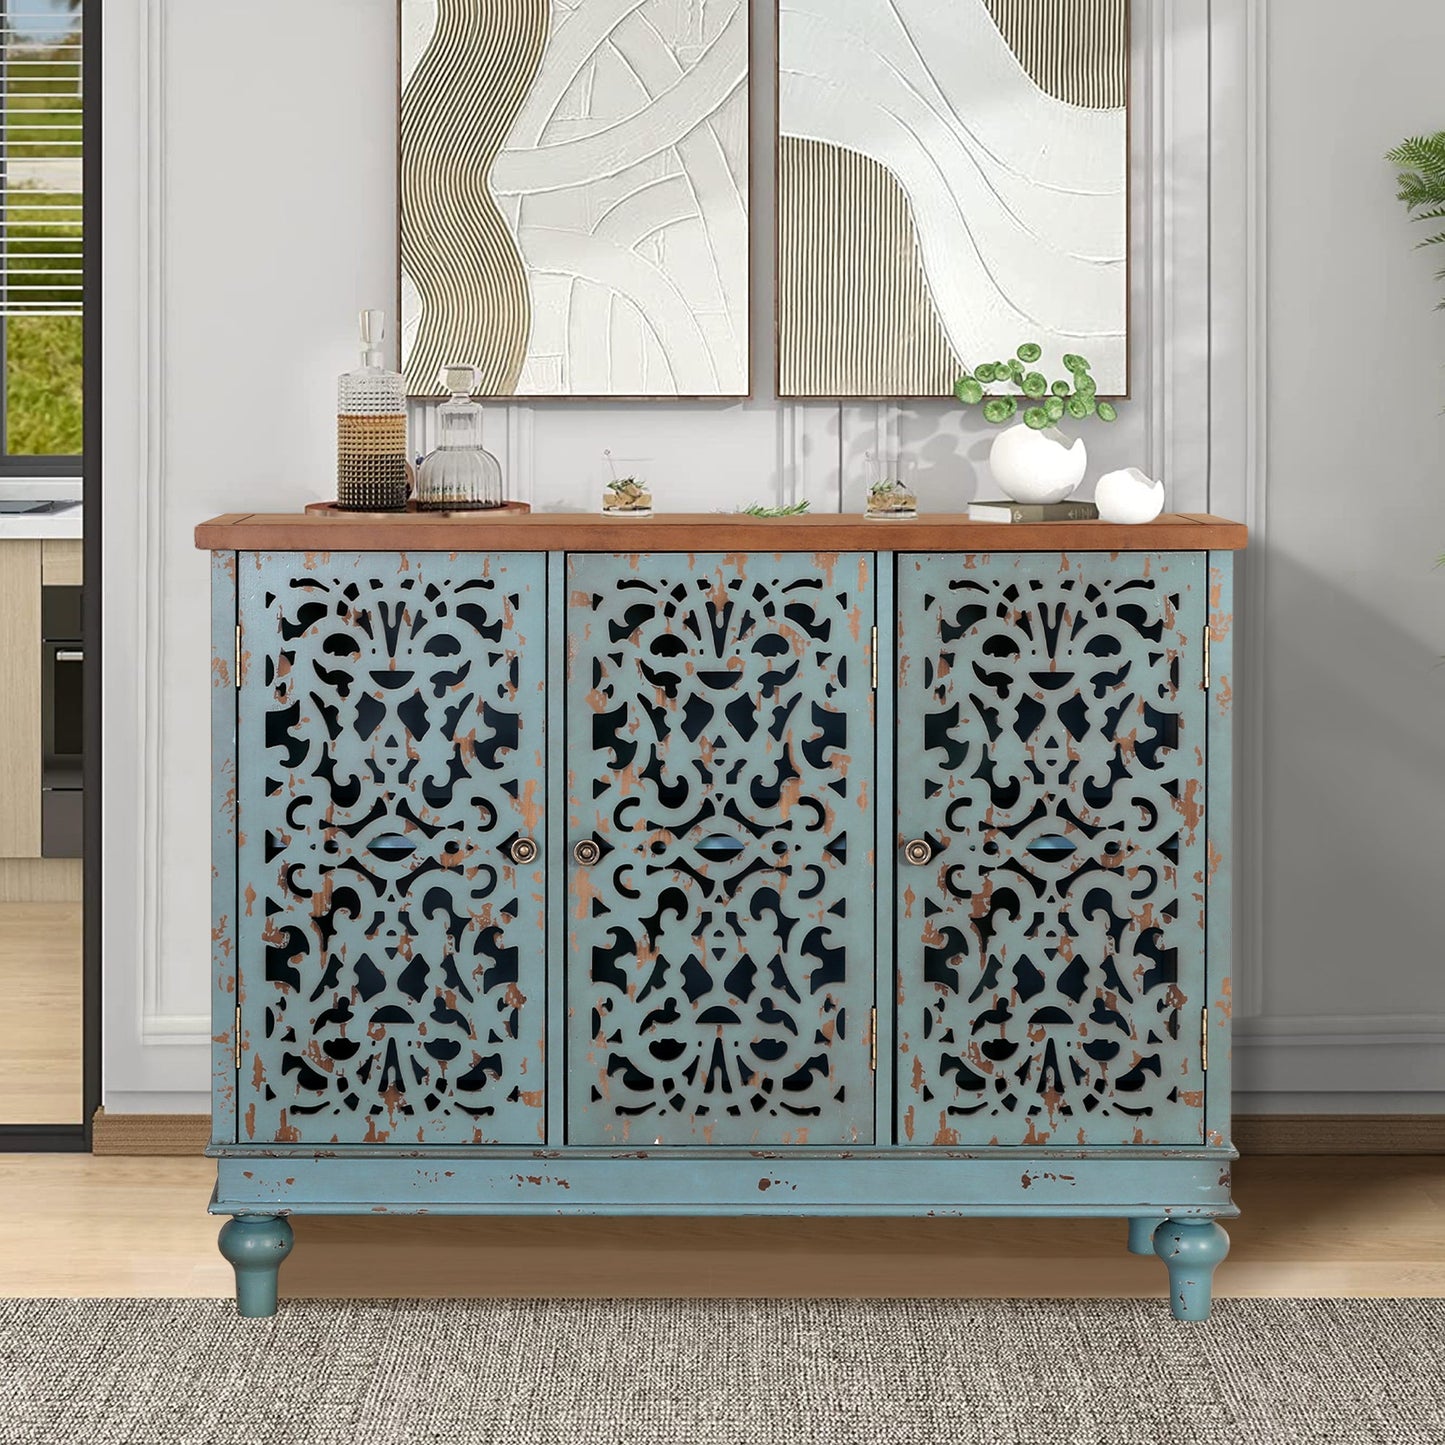 Sophia & William 3-Door Hollow-Carved Sideboard Accent Cabinet for Kitchen, Dining Room, Living Room, Entryway-Blue